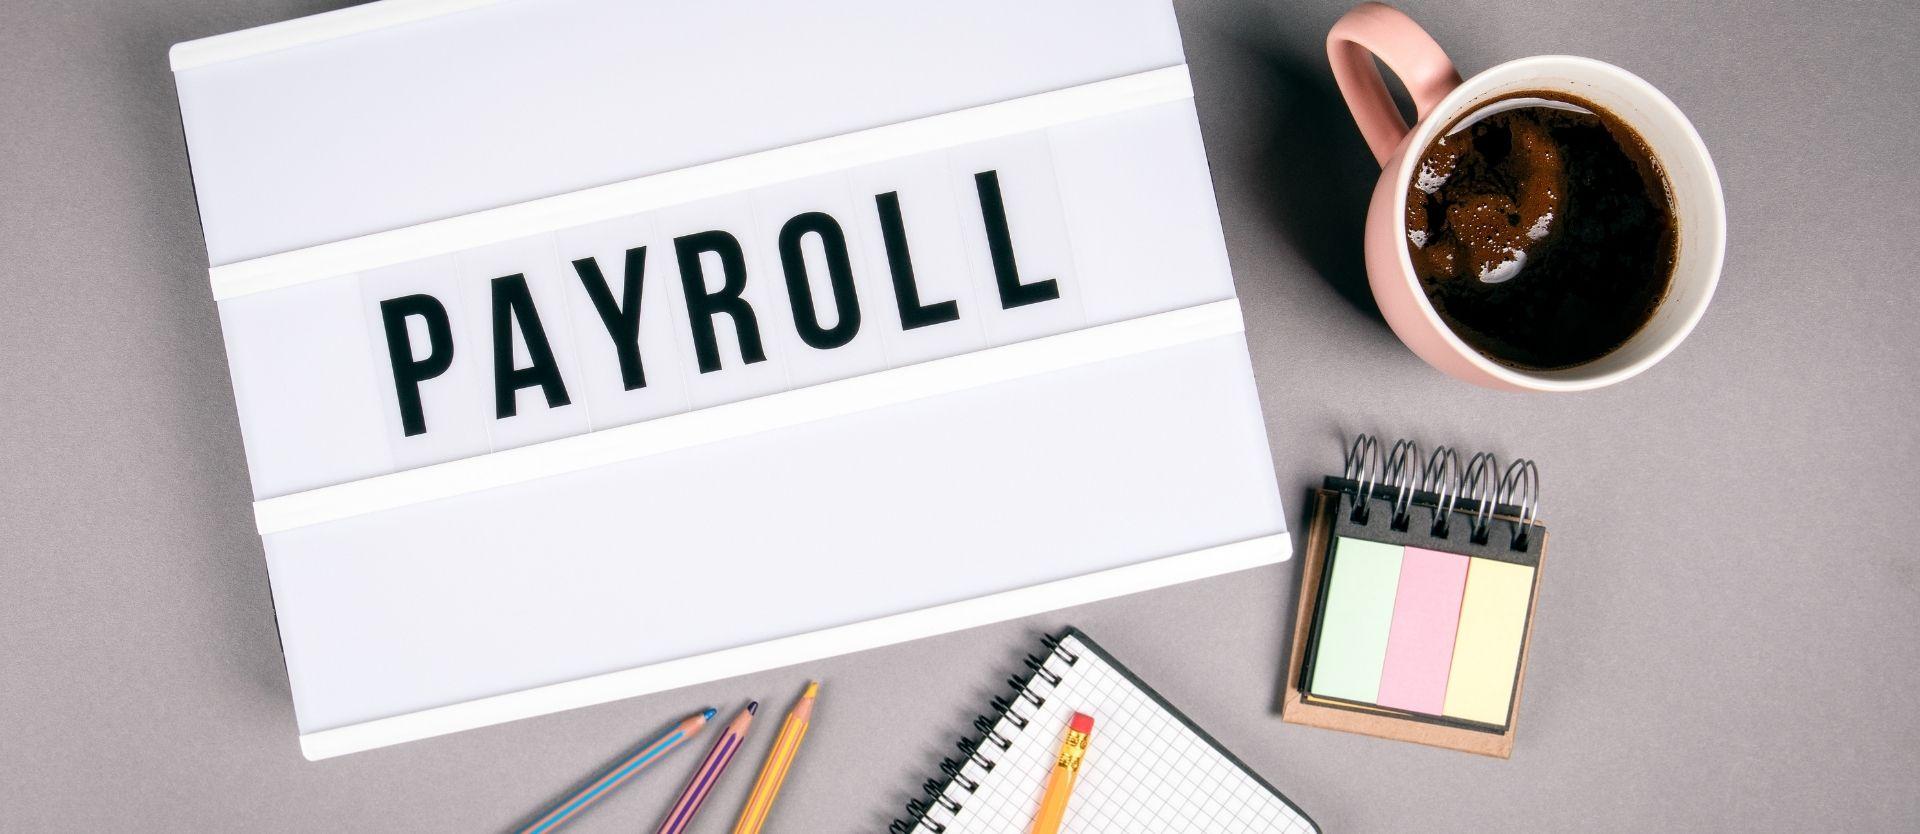 Top Ways your Business can Benefit from Payroll Services 